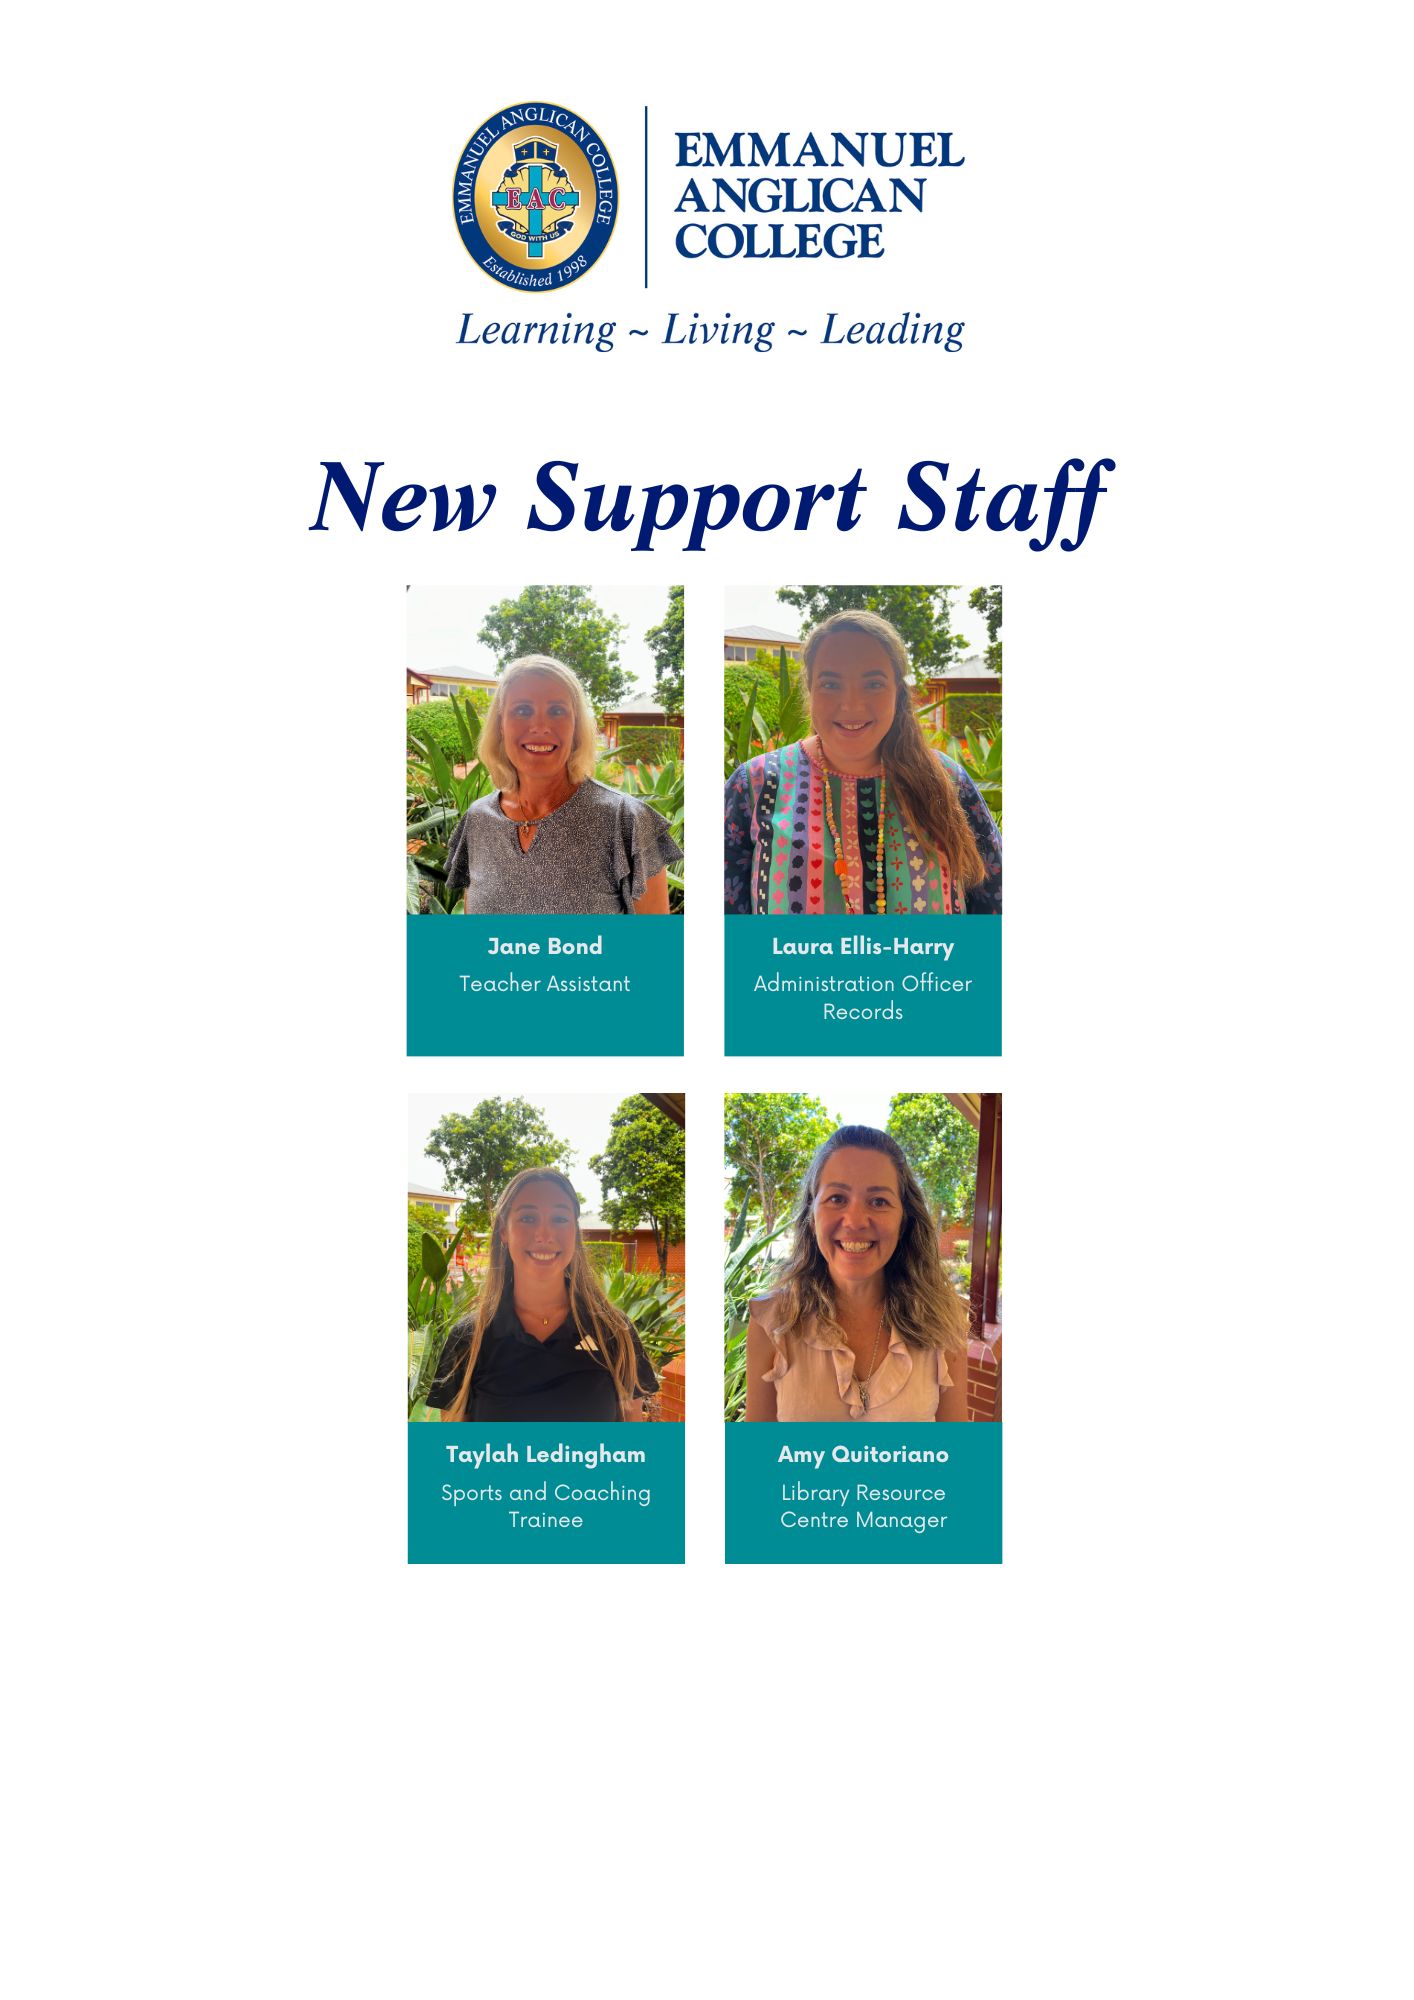 New Staff_Support